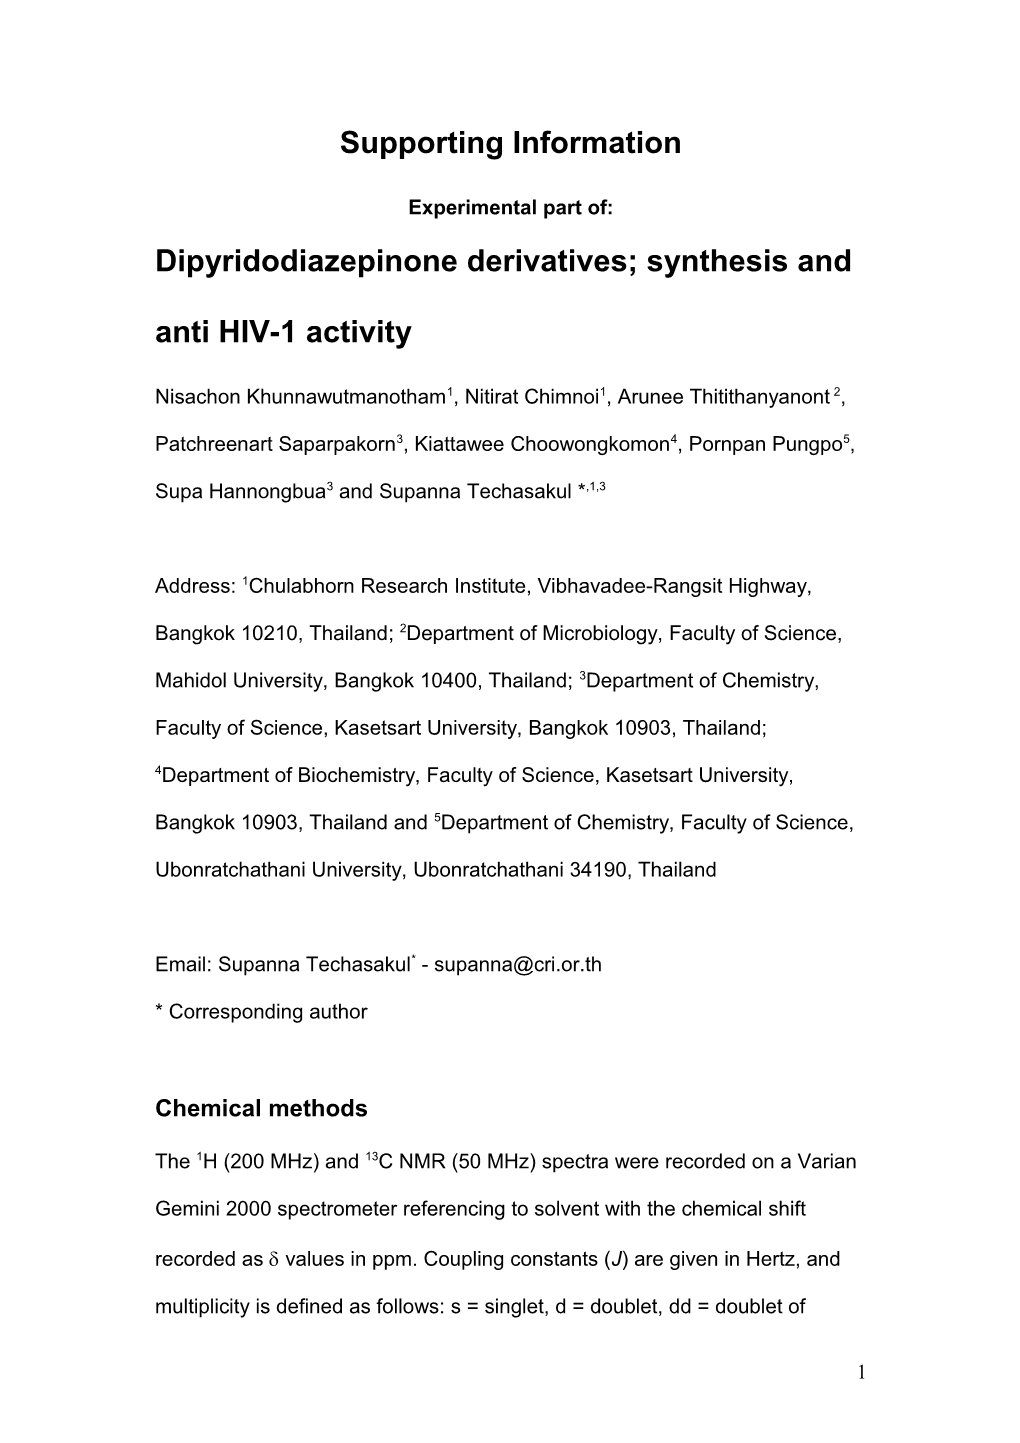 Dipyridodiazepinone Derivatives; Synthesis and Anti HIV-1 Activity